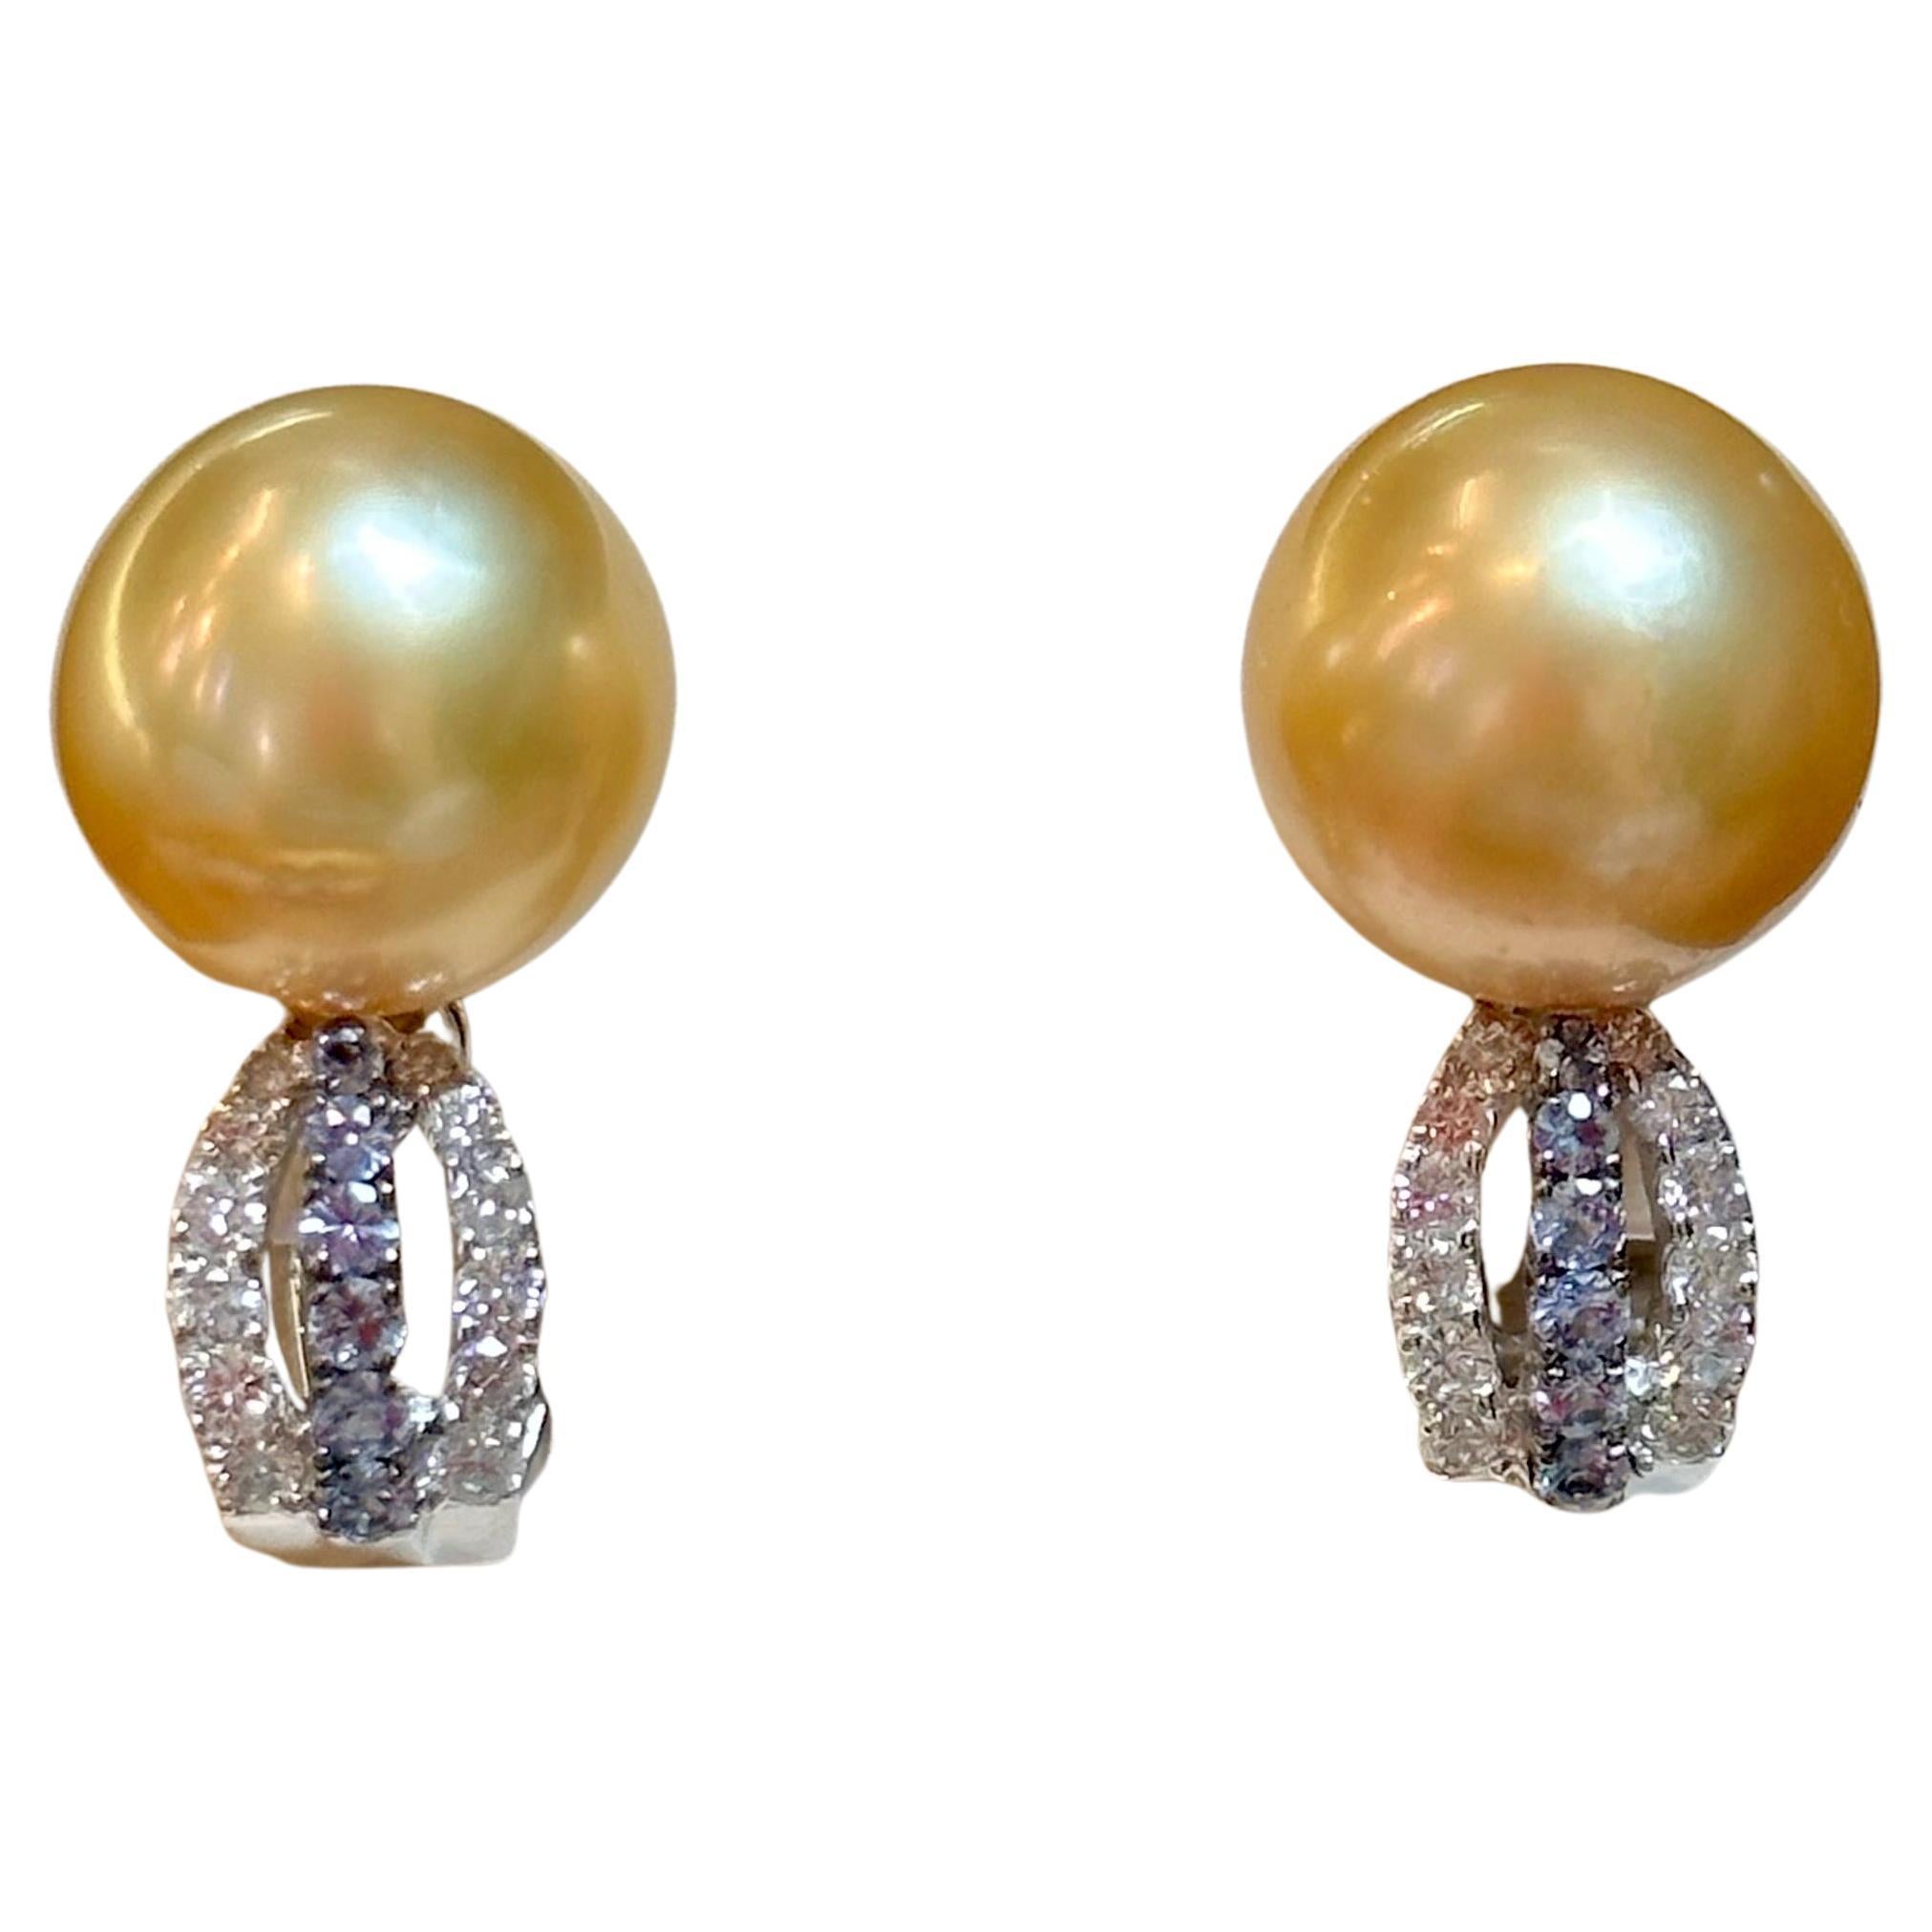 Presenting the exquisite 12.5mm Round  Golden South Sea Pearl & Diamond Cocktail Stud Earrings, a magnificent estate piece. These captivating earrings are crafted from 18 Karat white gold, showcasing a timeless beauty. 

Each earring features a